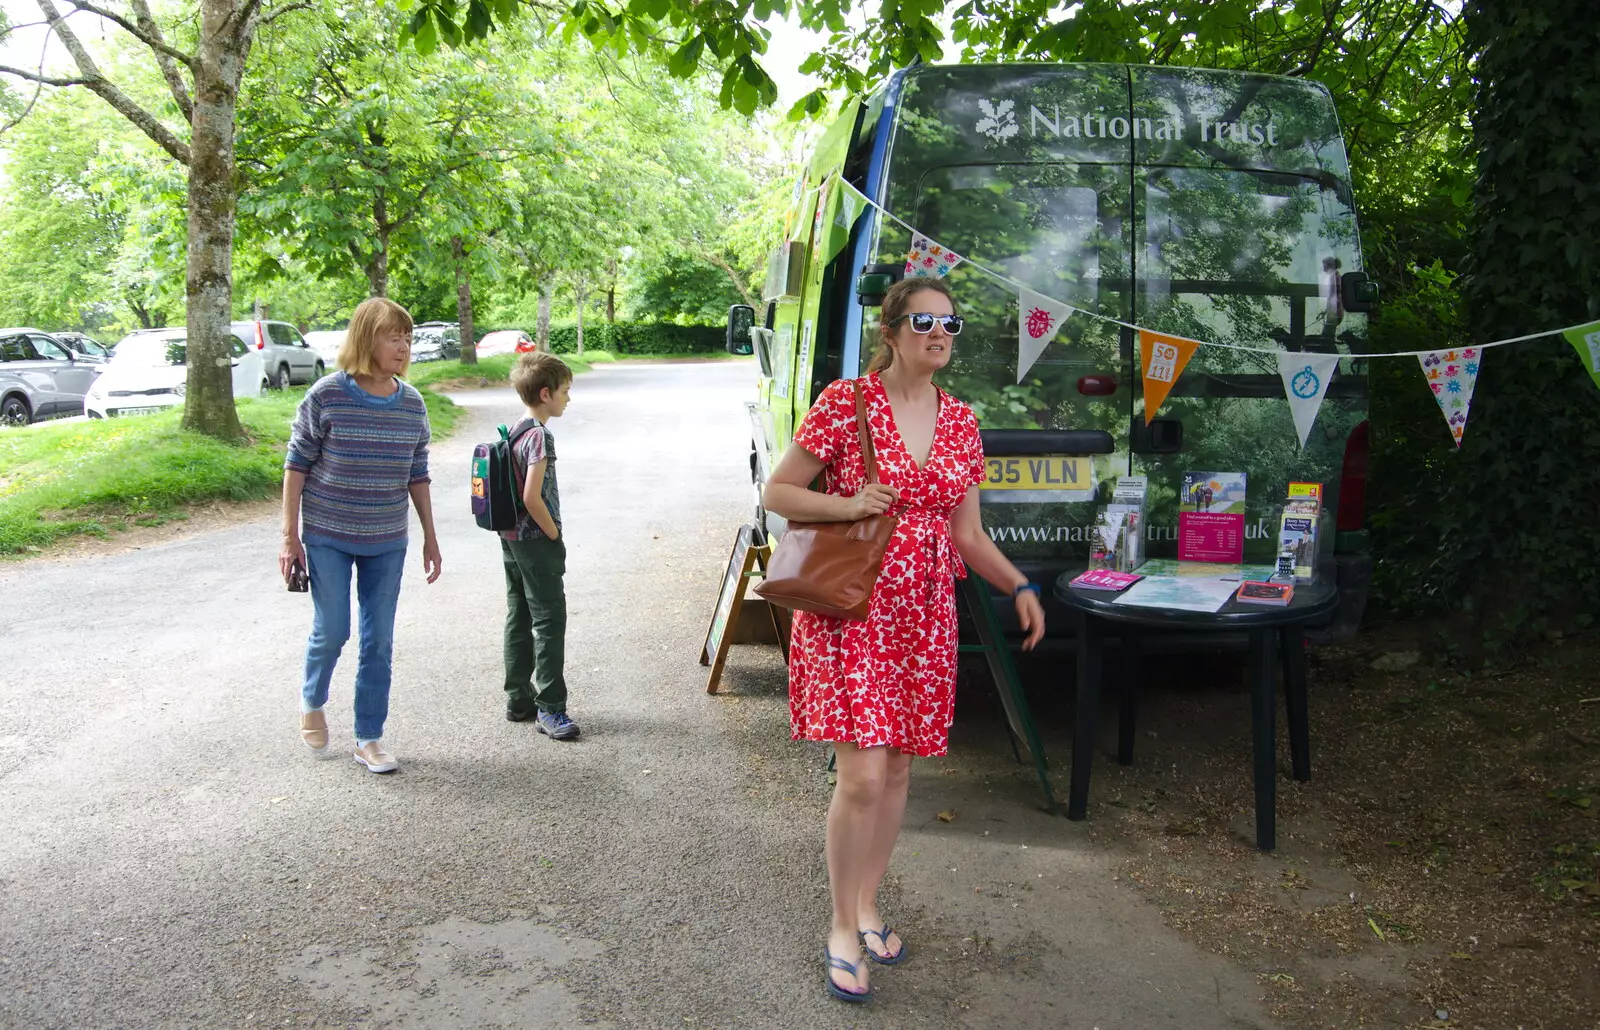 The National Trust van looks almost transparent, from Chagford Lido and a Trip to Parke, Bovey Tracey, Devon - 25th May 2019